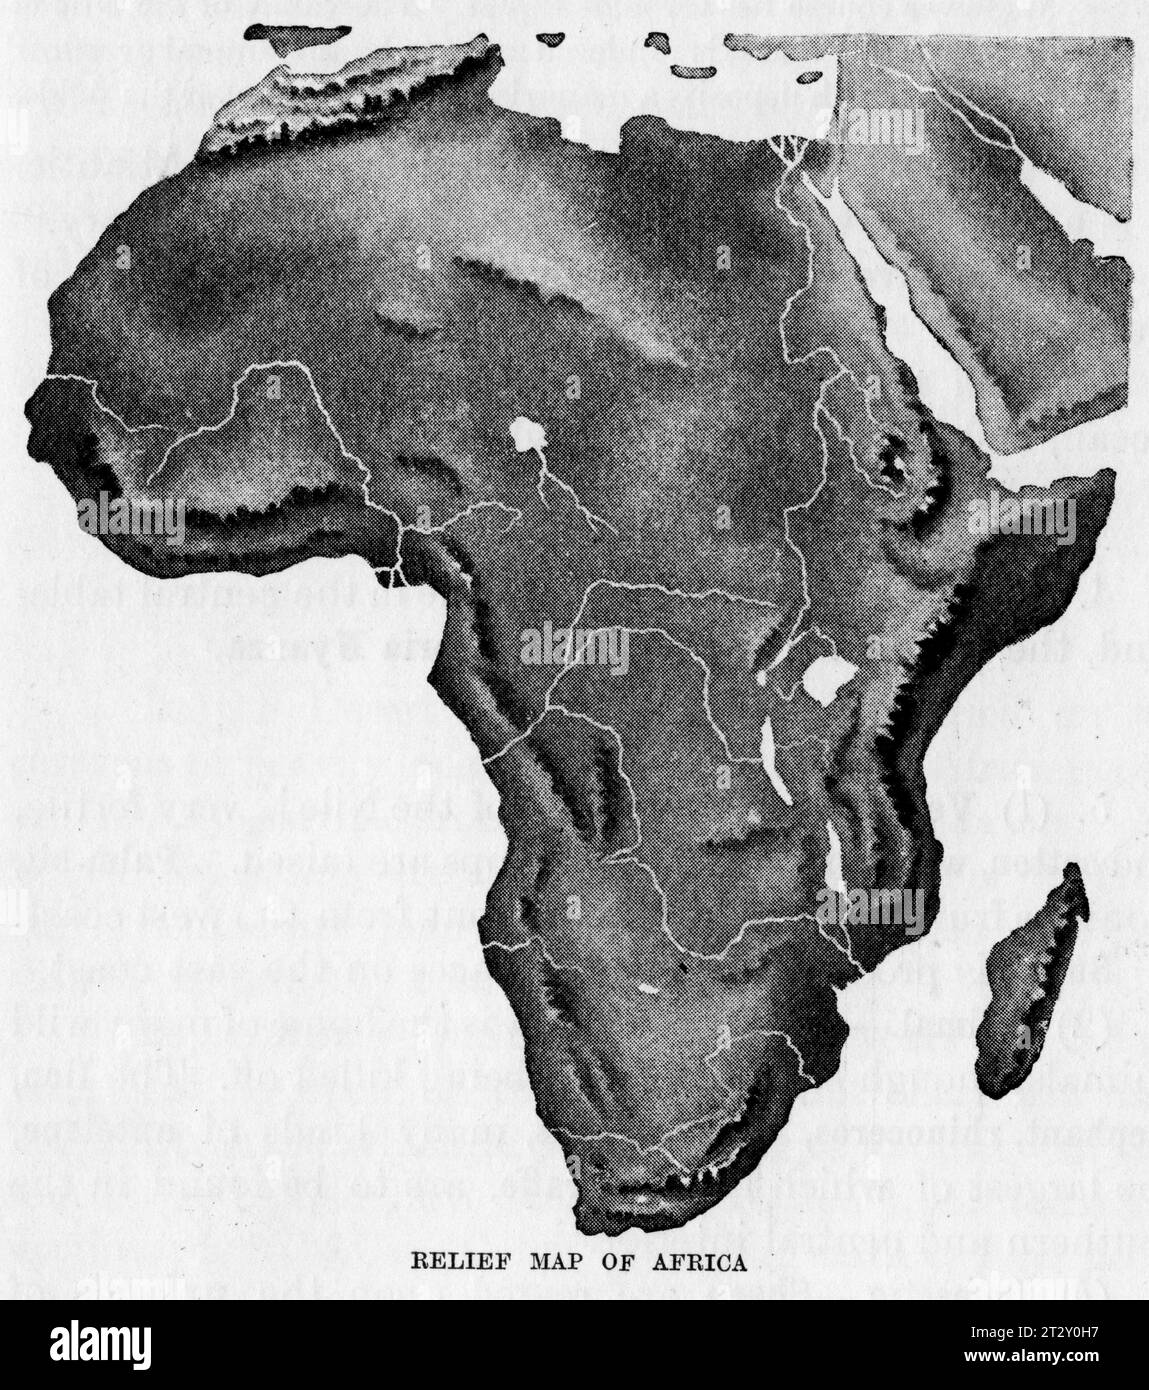 relief map of Africa circa 1910 from a school geography text book Stock Photo